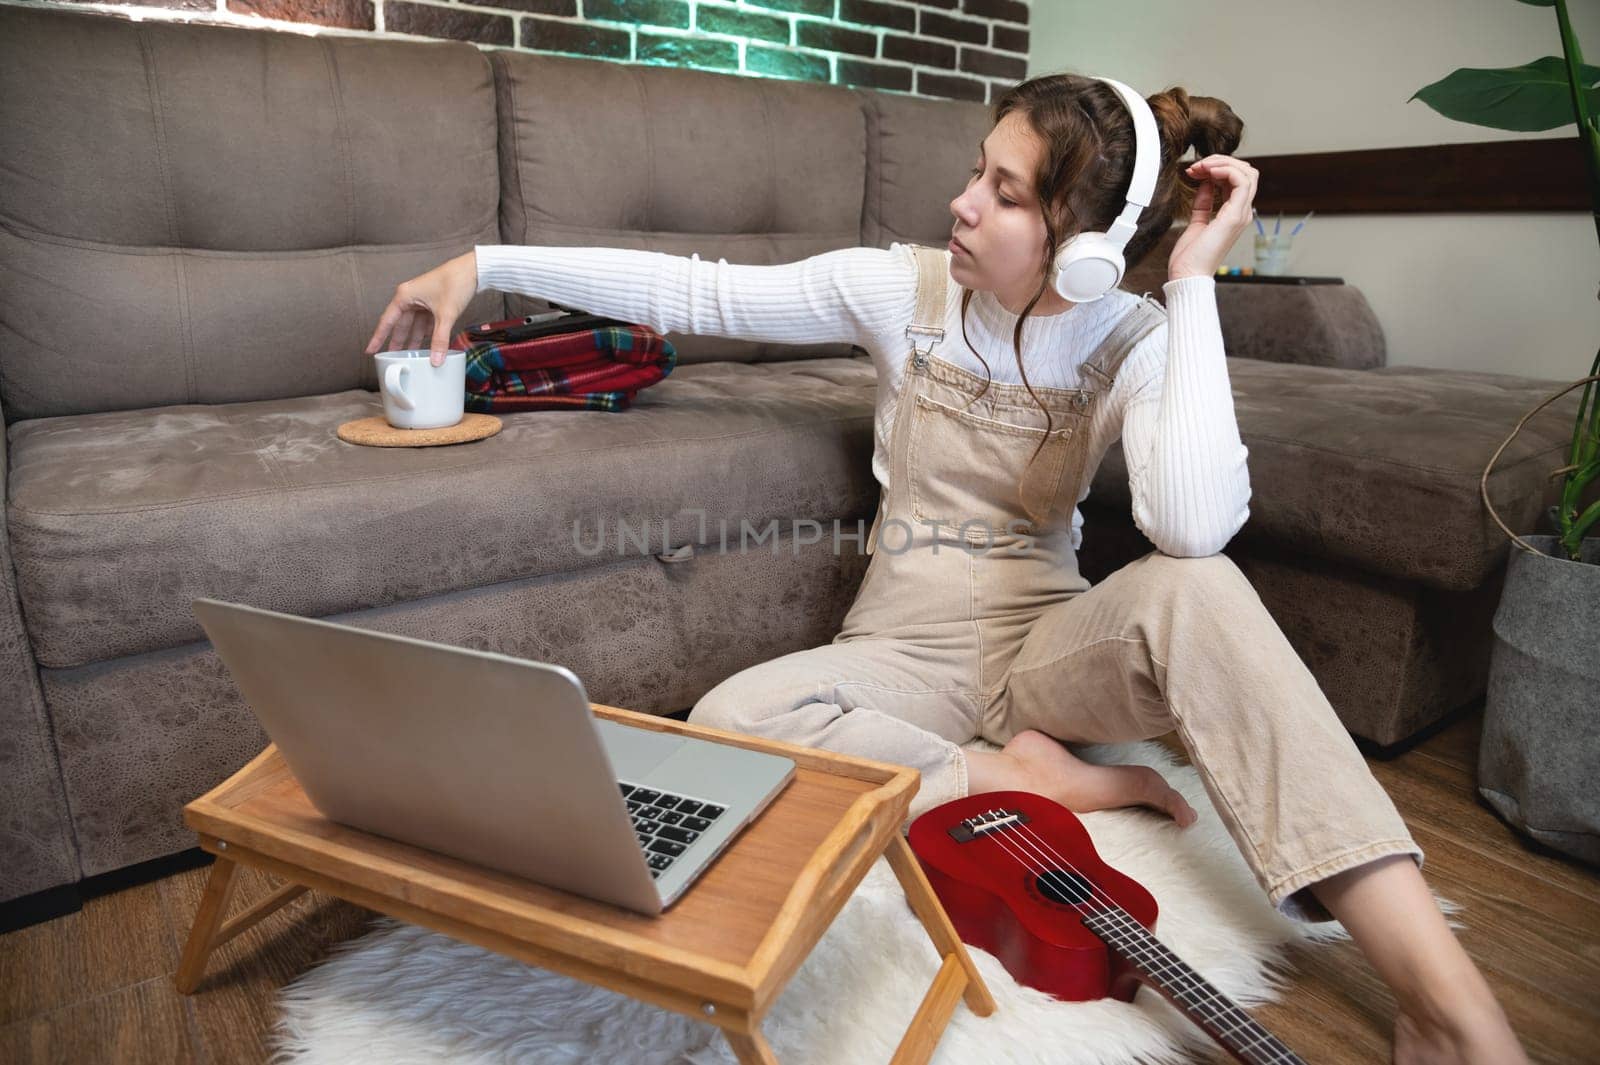 Image of a smiling caucasian young woman drinking hot tea and sitting next to a laptop on the floor, relaxing at home. Thoughtful professional working from home or student looking away while on a call.